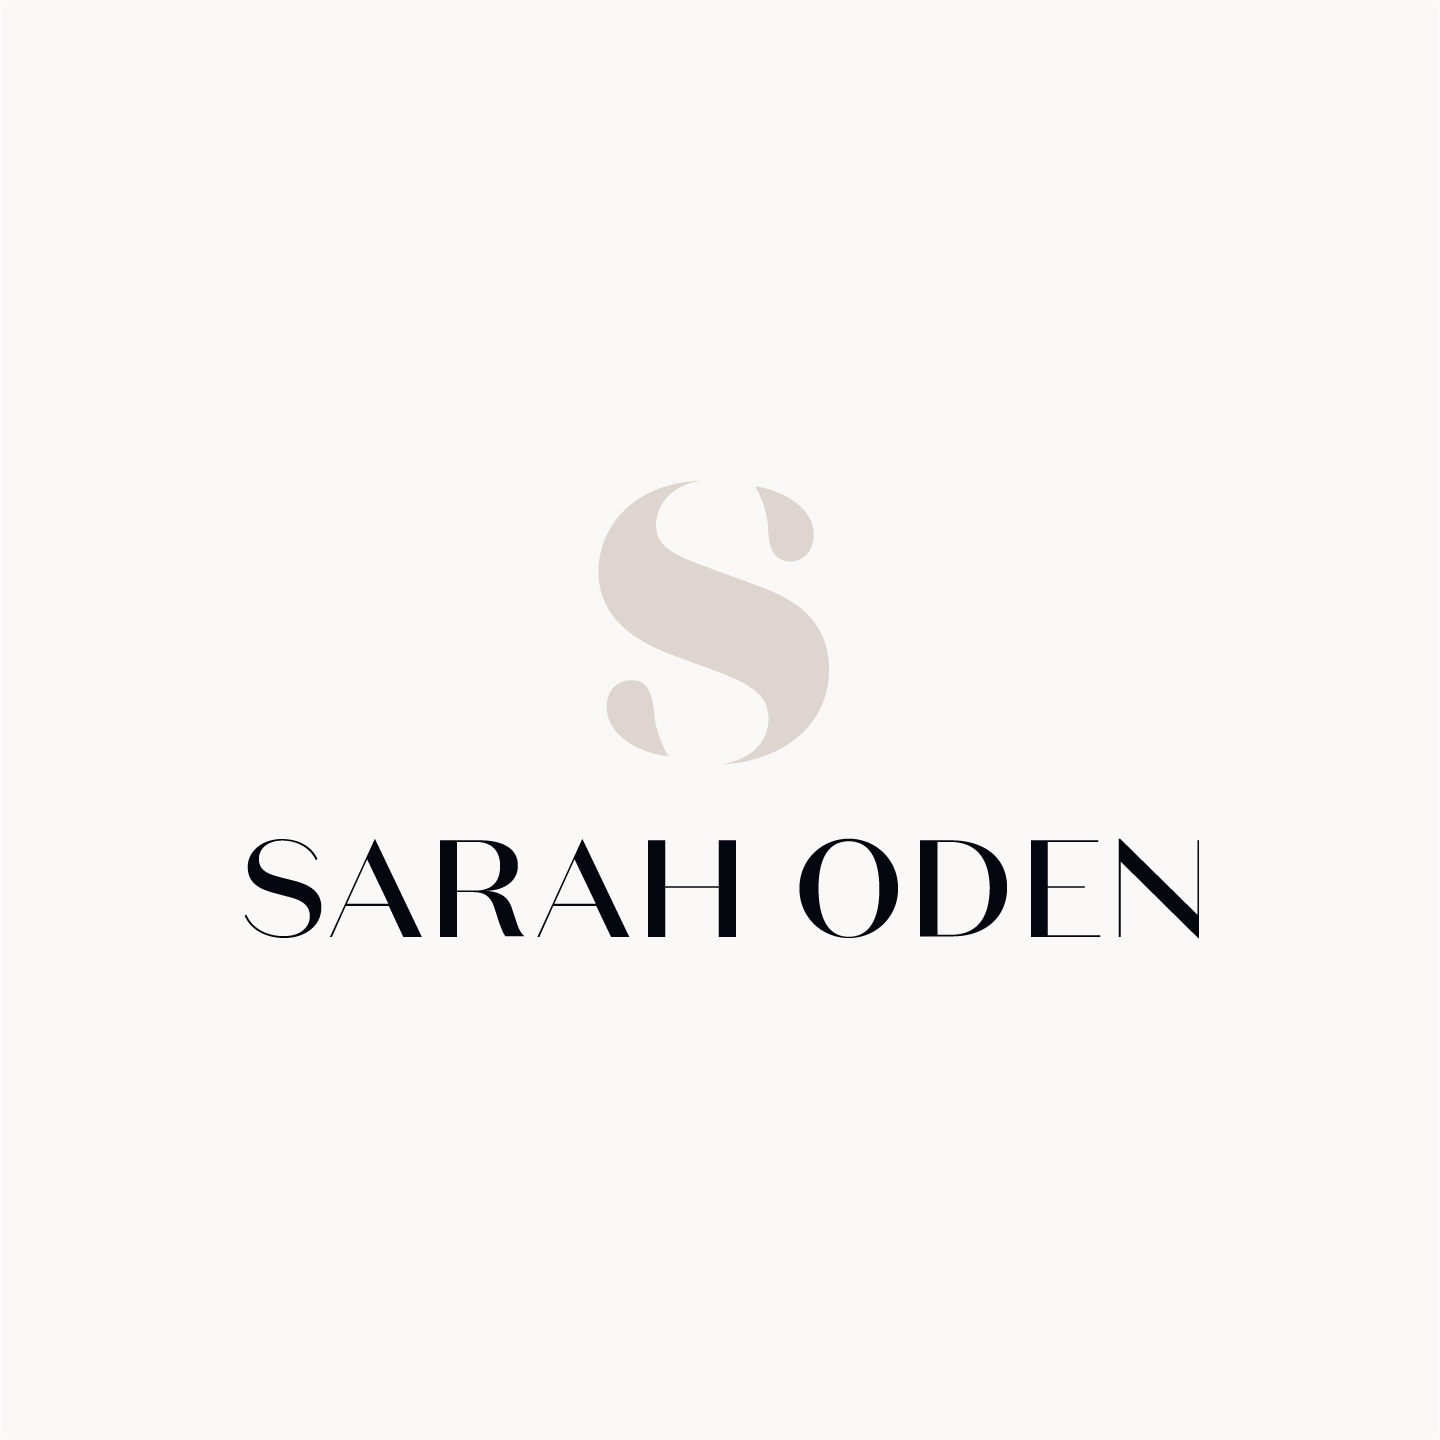 Sarah Oden Photographer logo by Hunter Oden of oden.house